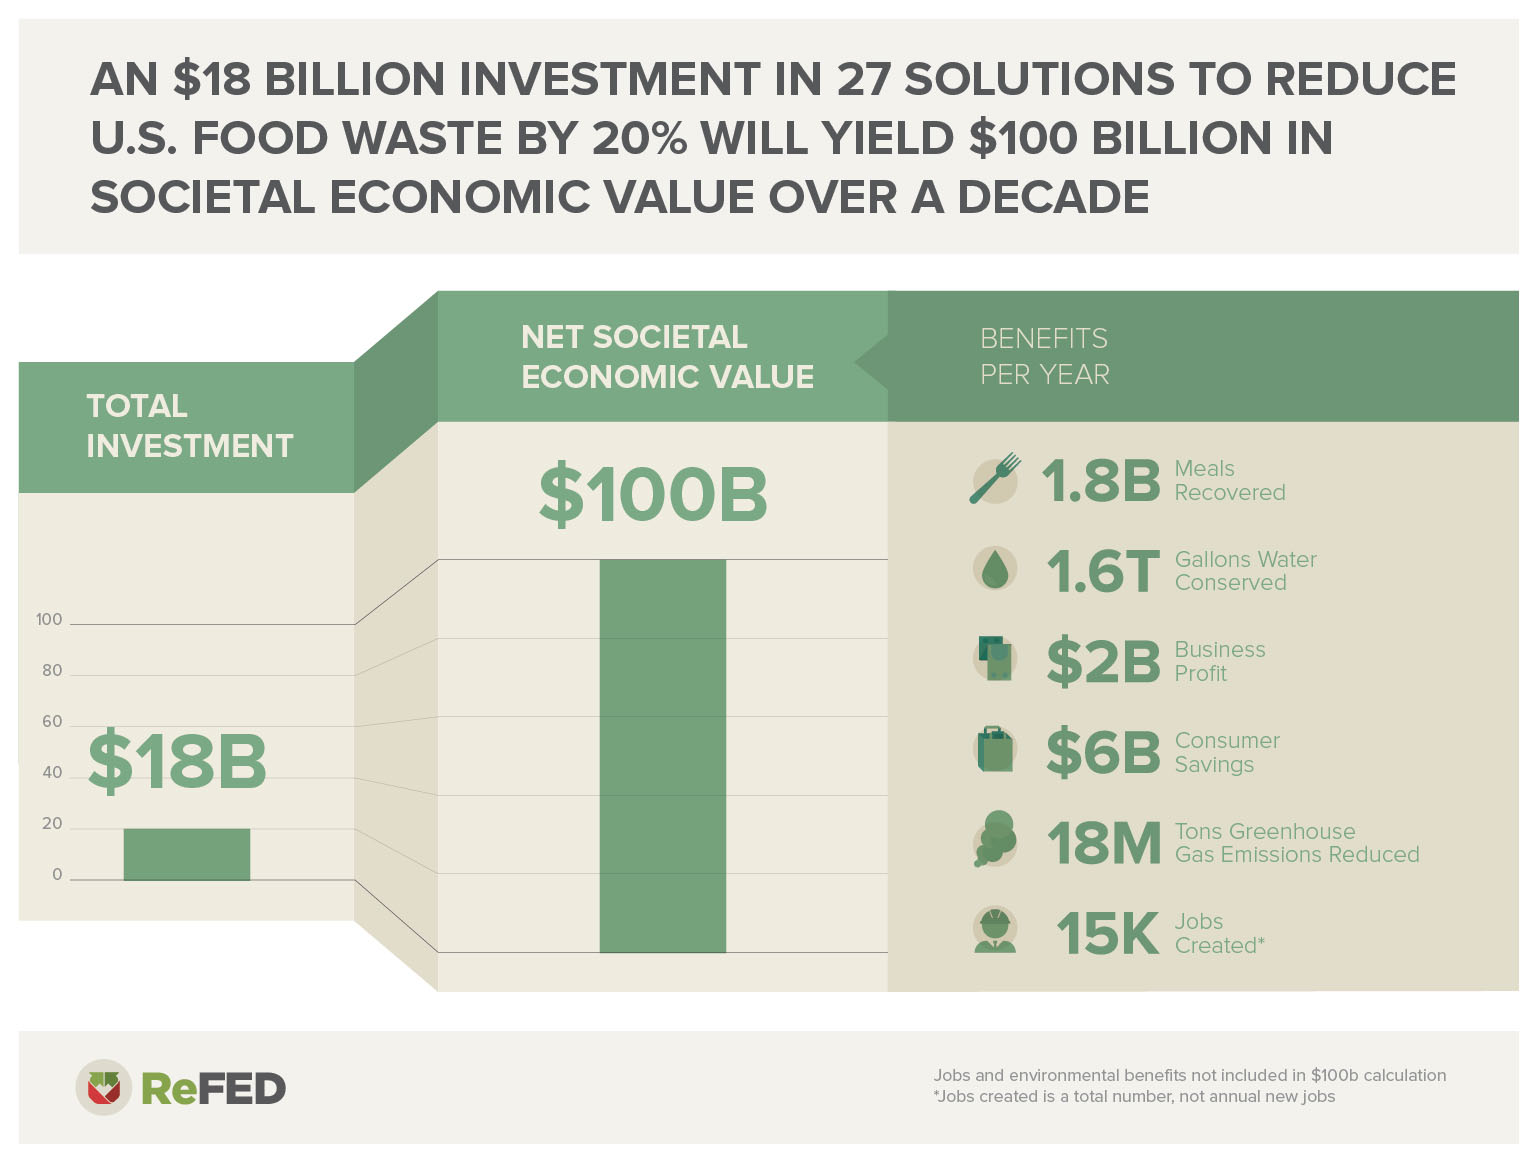 An $18 billion investment in 27 solutions to food waste will yield $100 billion in societal economic value 